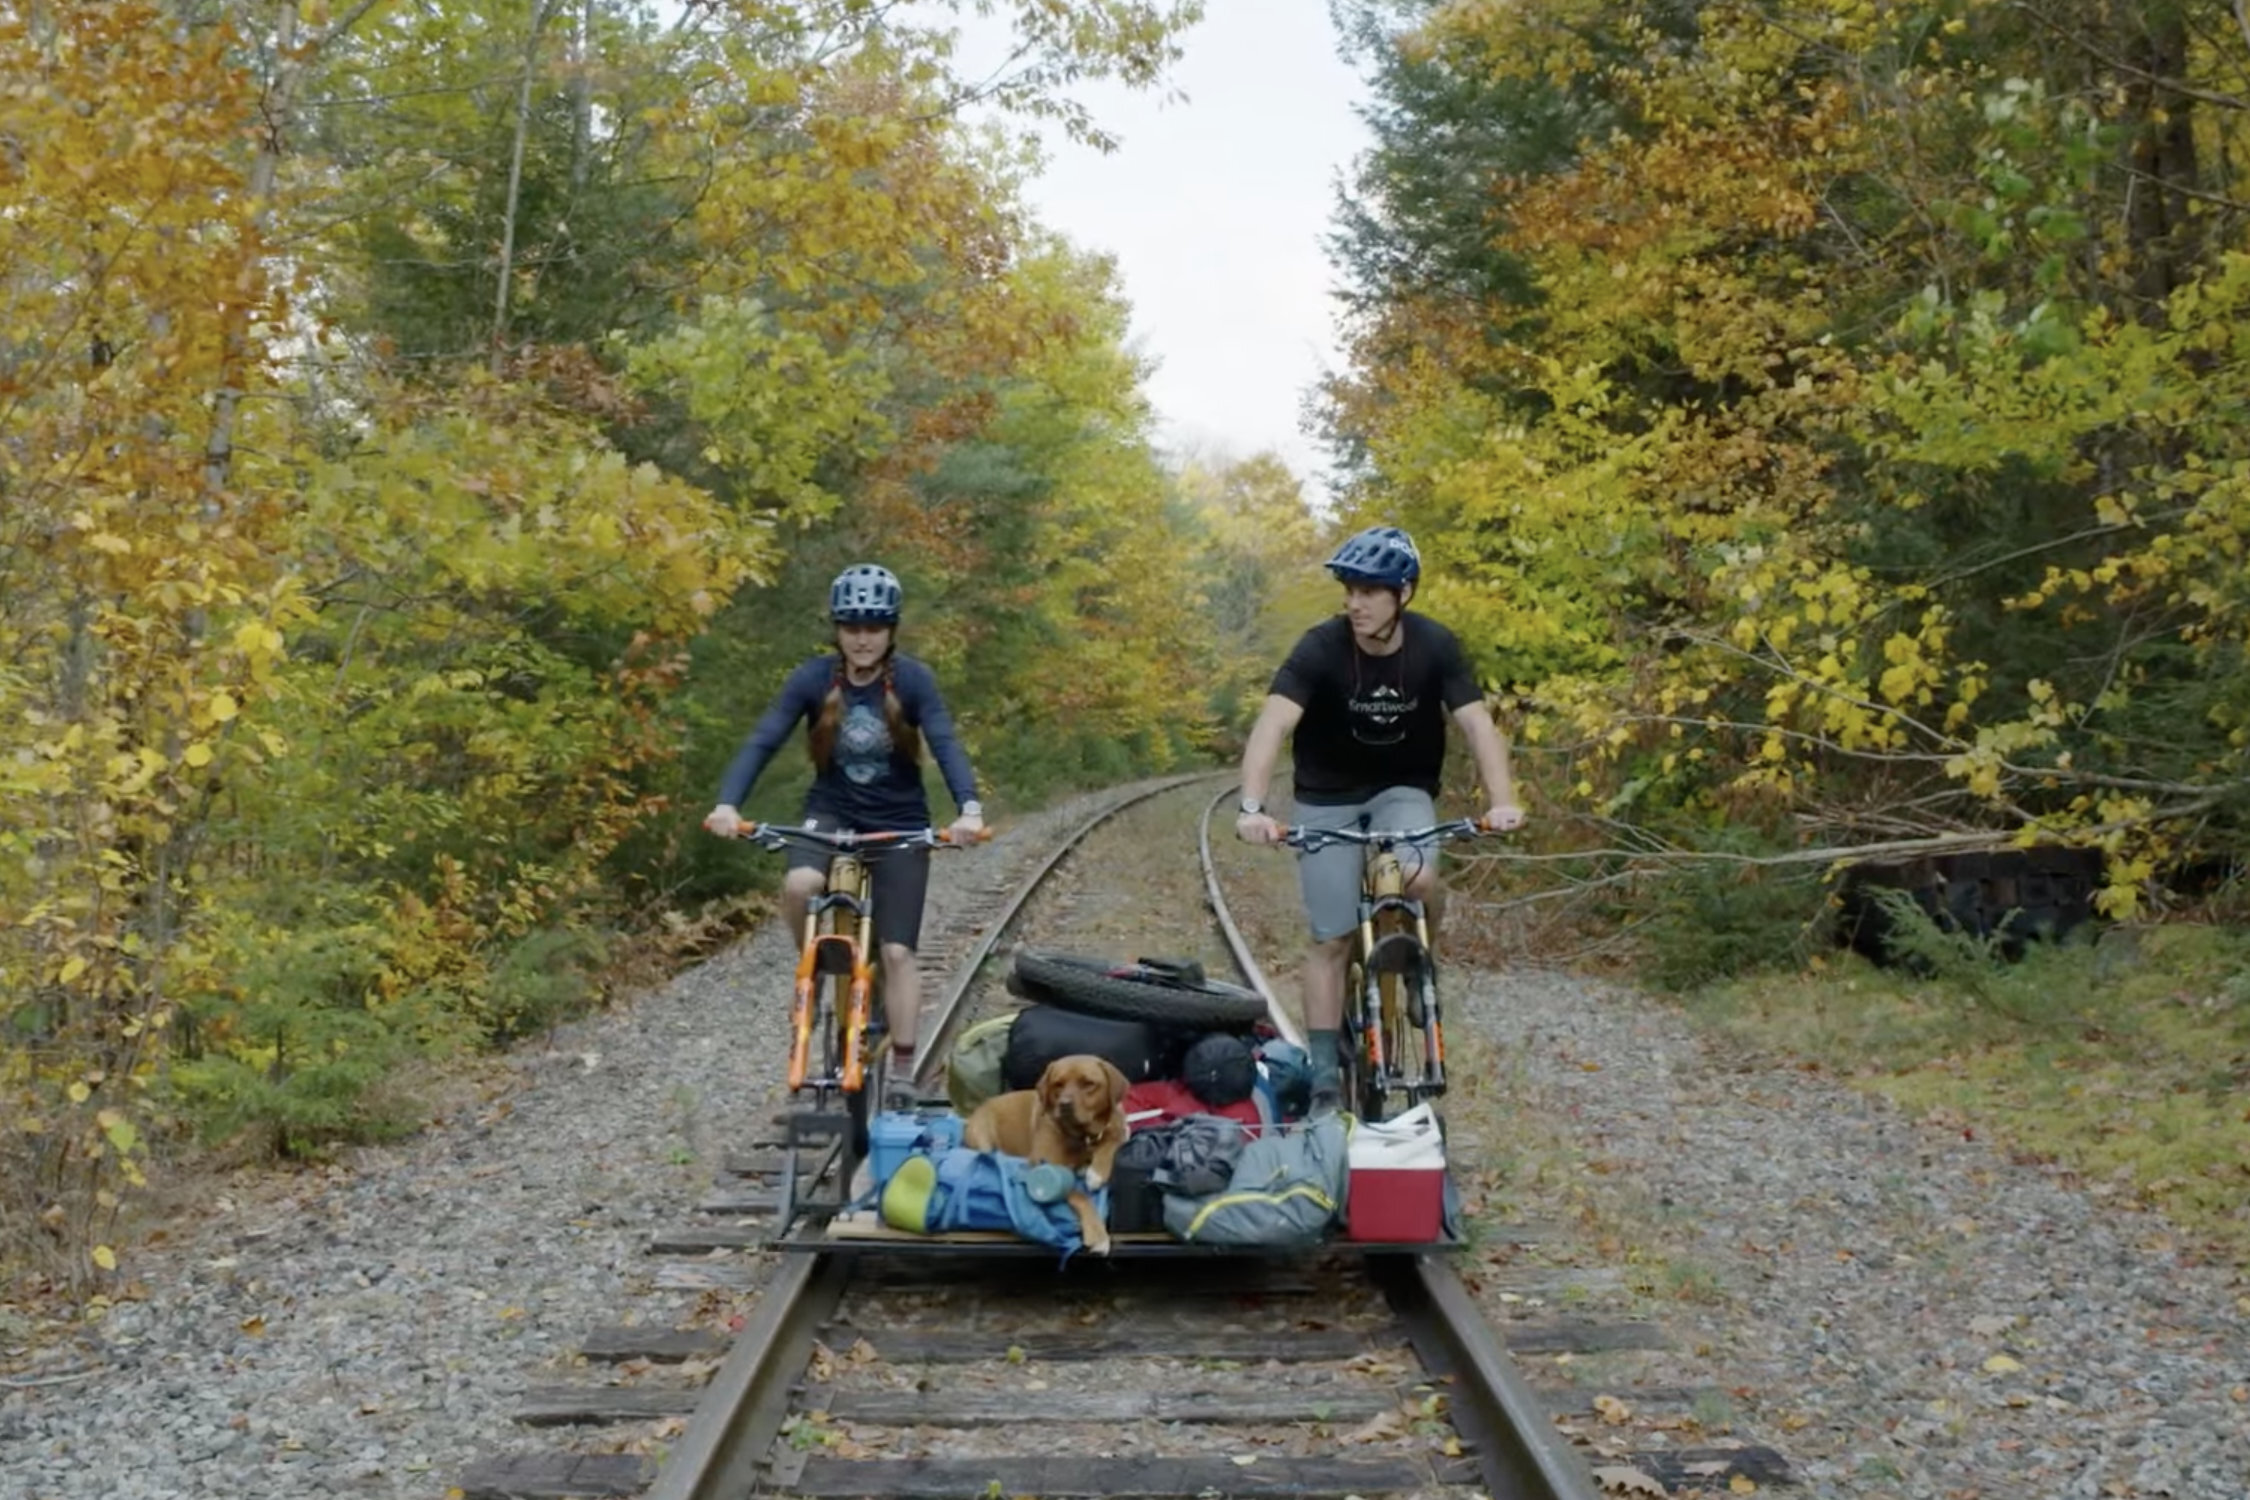 Smartwool Presents: Riding the Rails - VIDEO